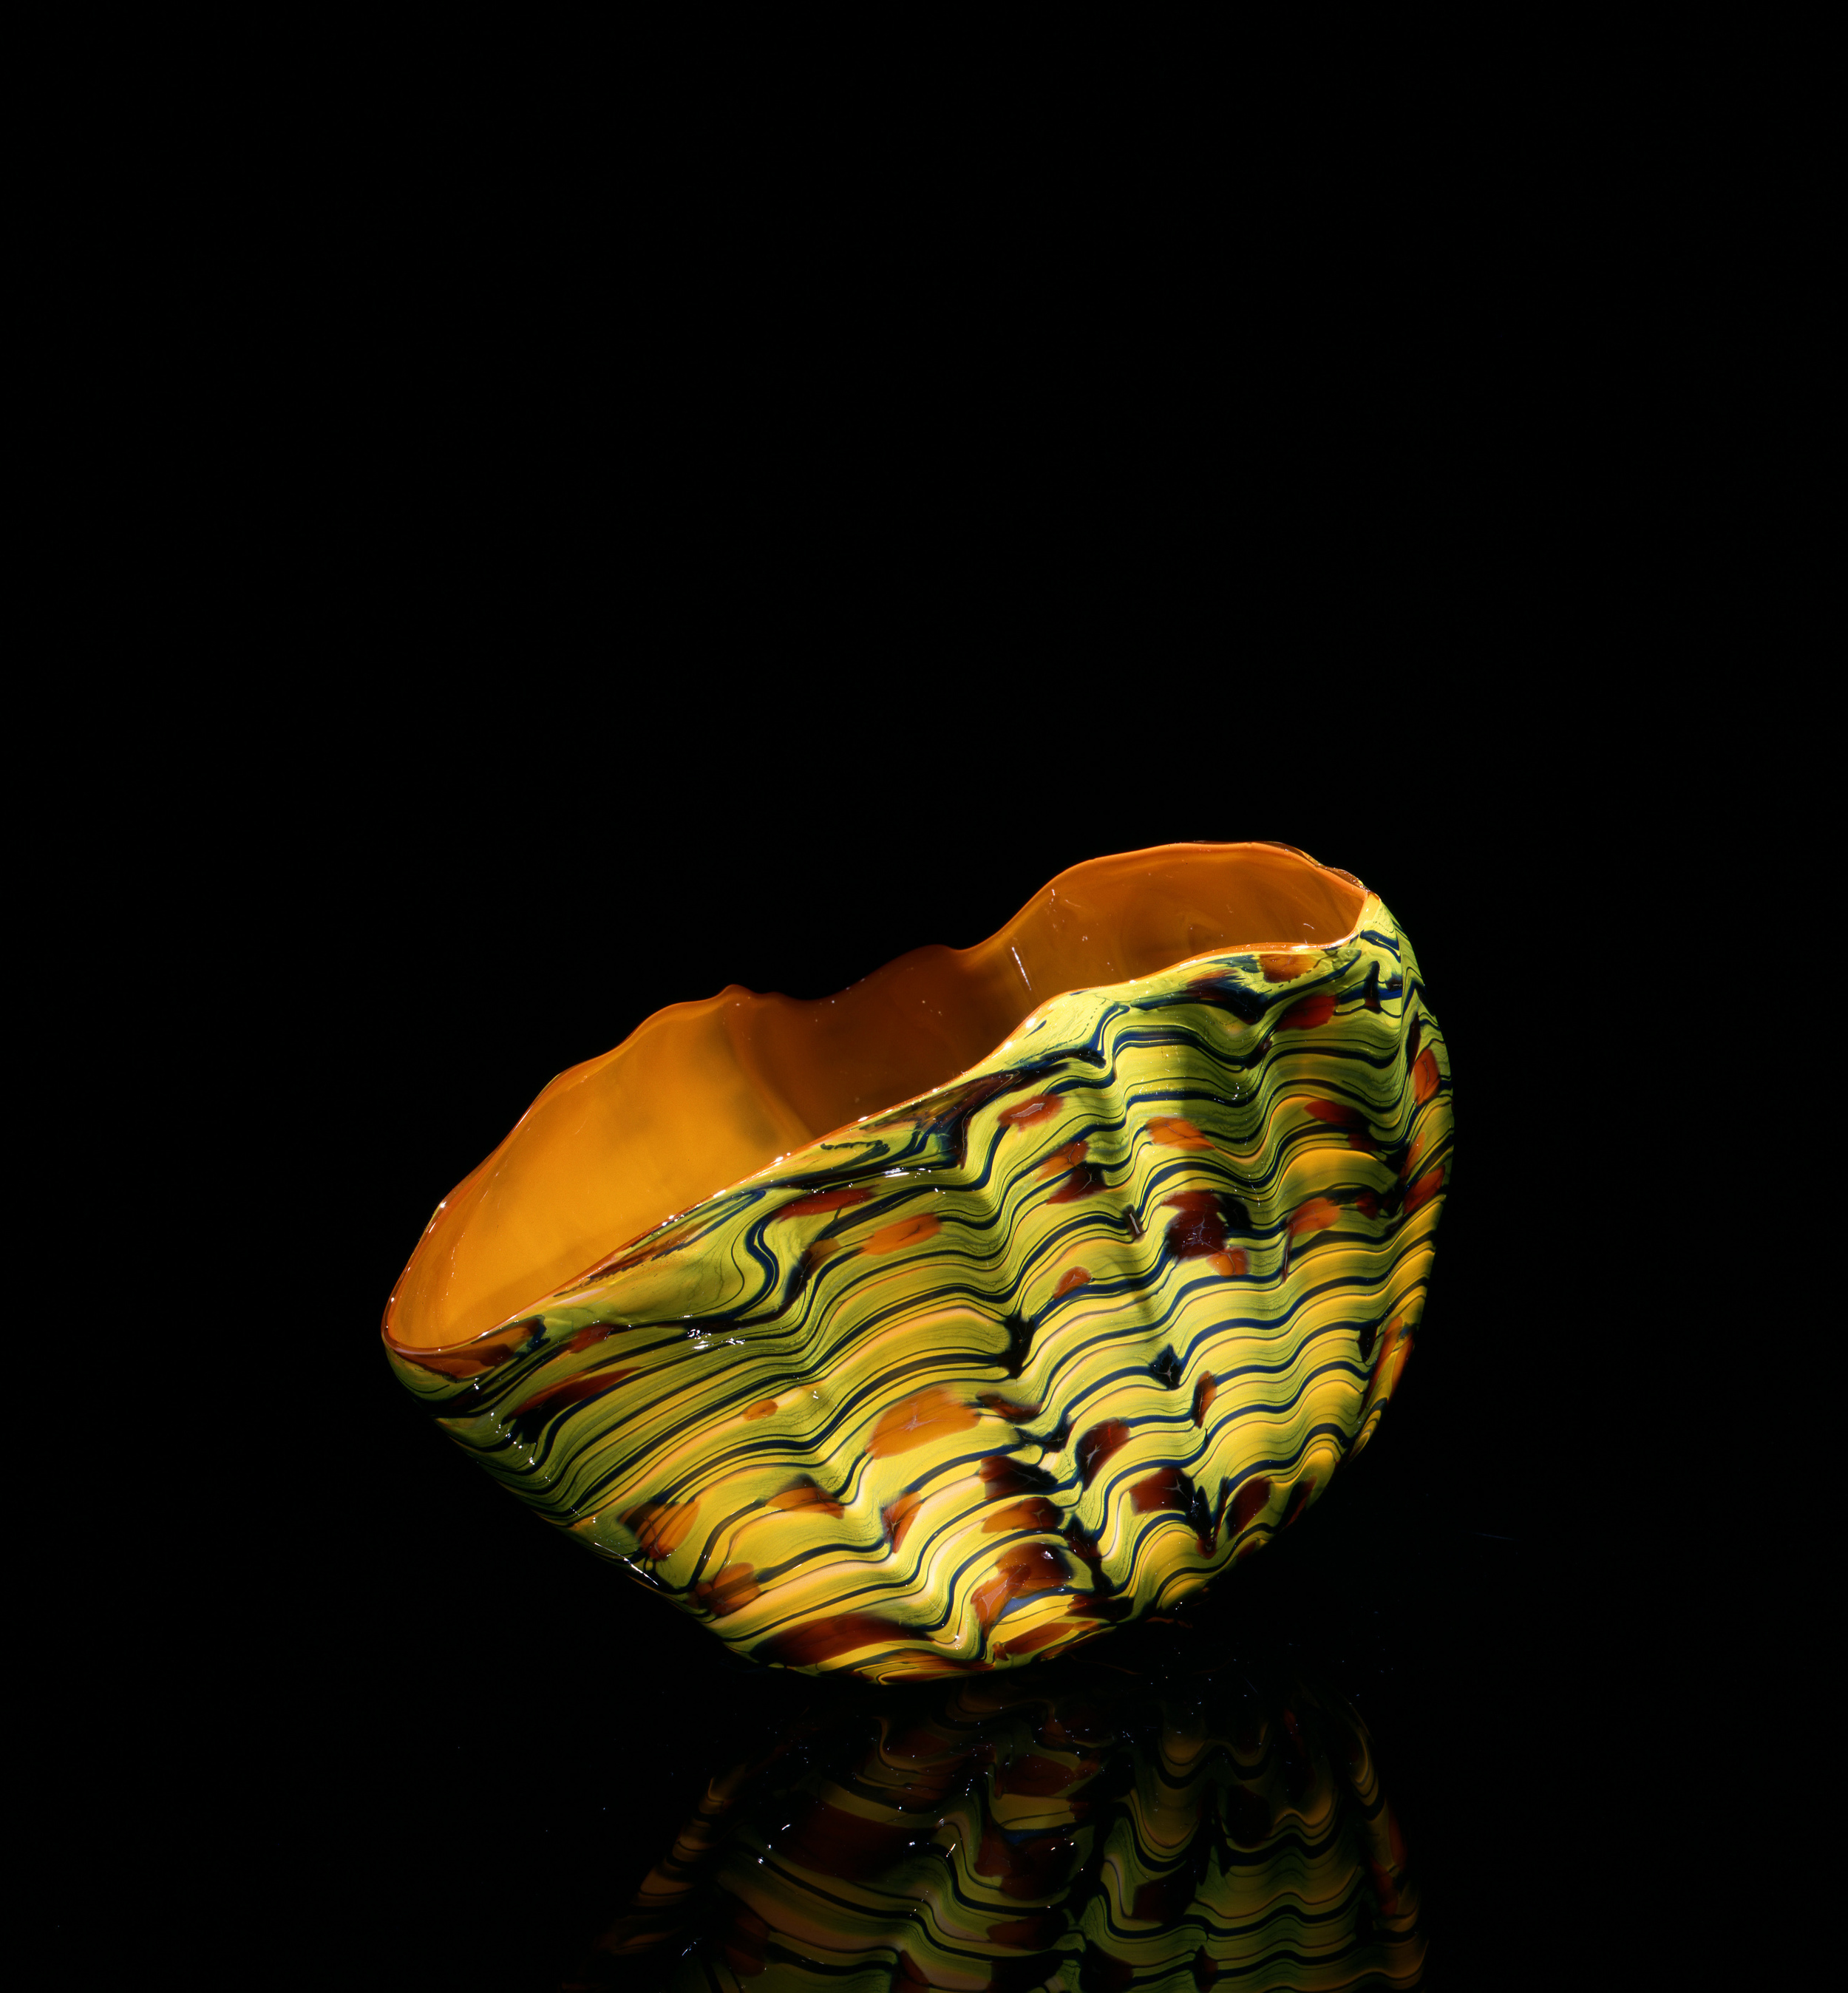  Dale Chihuly, Realgar Macchia with Cypress and Laurel Patterning &nbsp; (1981, glass, 8 x 11 x 7 inches), DC.108 